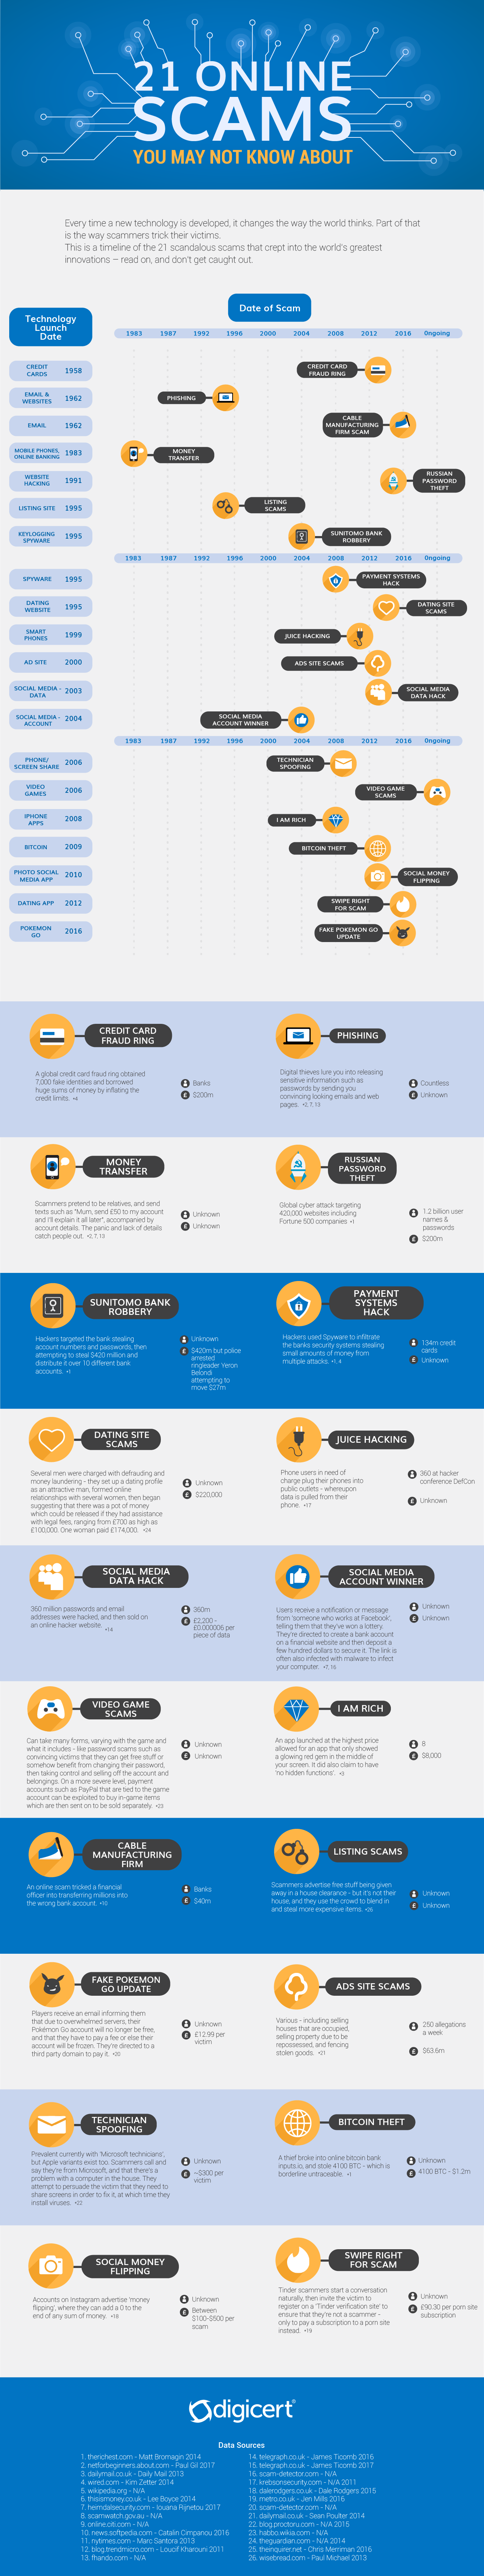 21 Online Scams You May Not Know About [infographic]